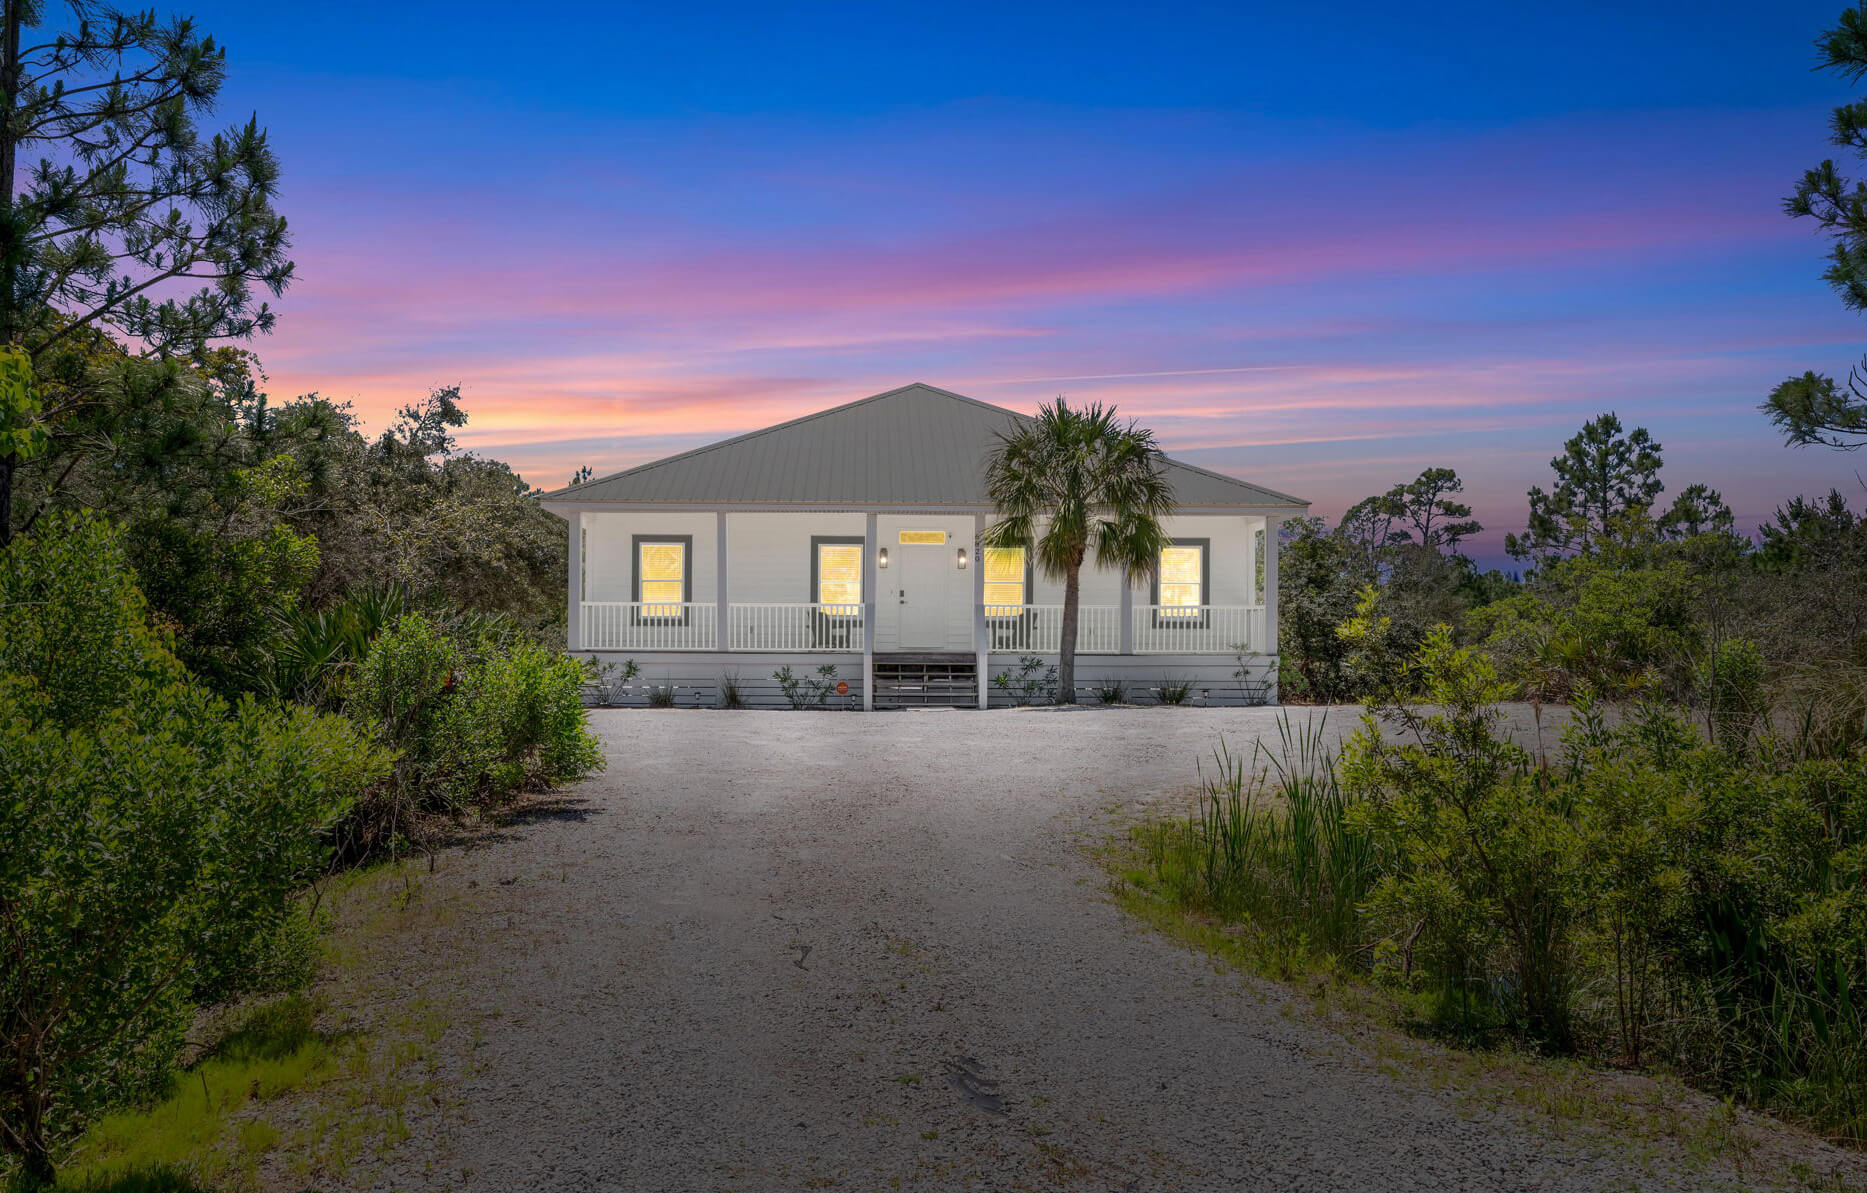 Photo of Paradise Palms property exterior at twilight in Gulf Shores, Alabama.